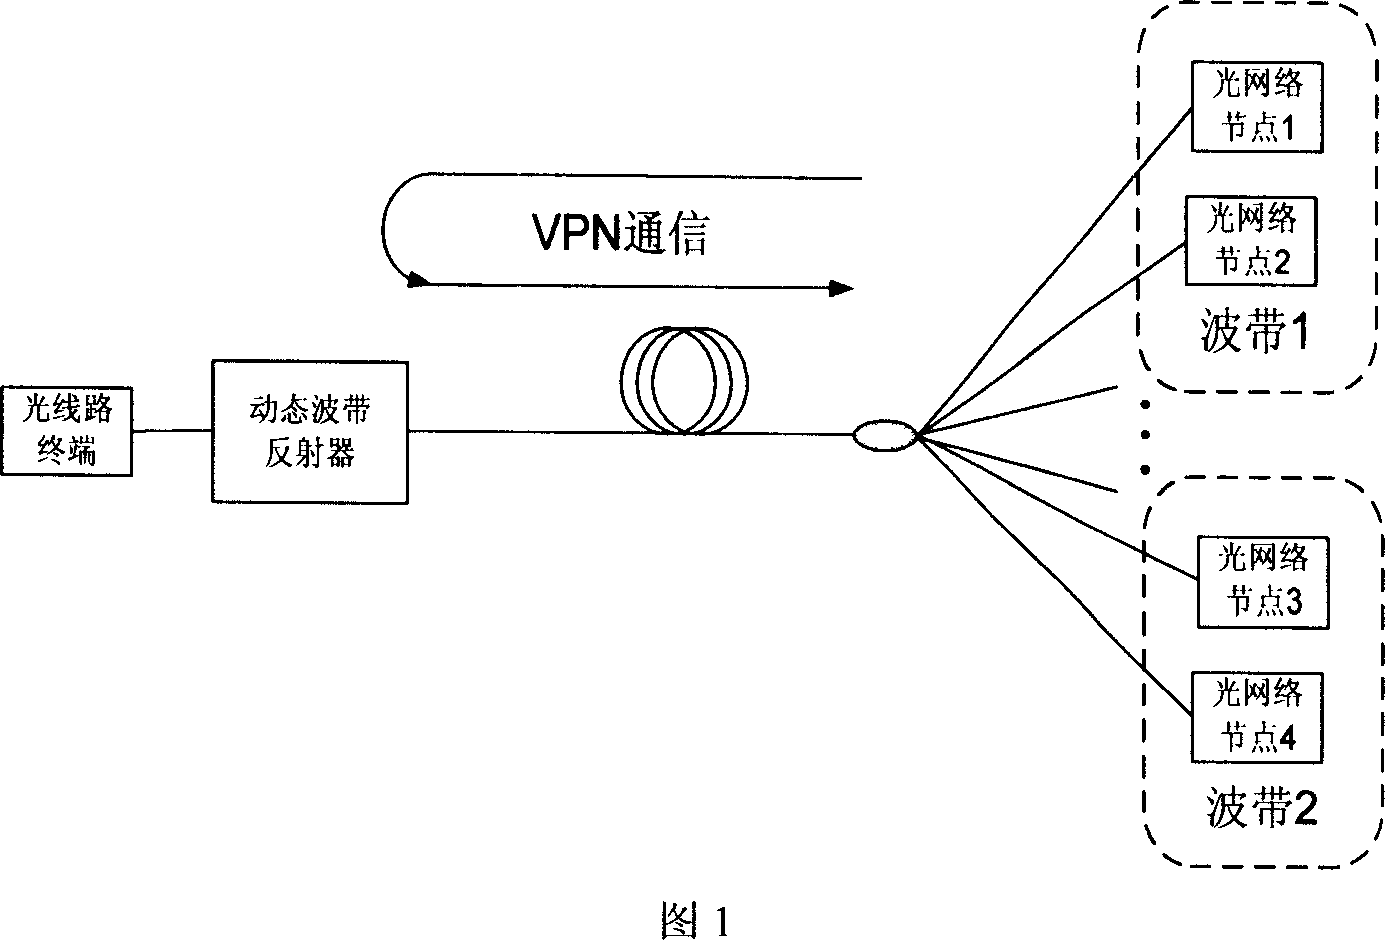 Network structure for realizing the full-optical virtual private network between more than two passive optical networks